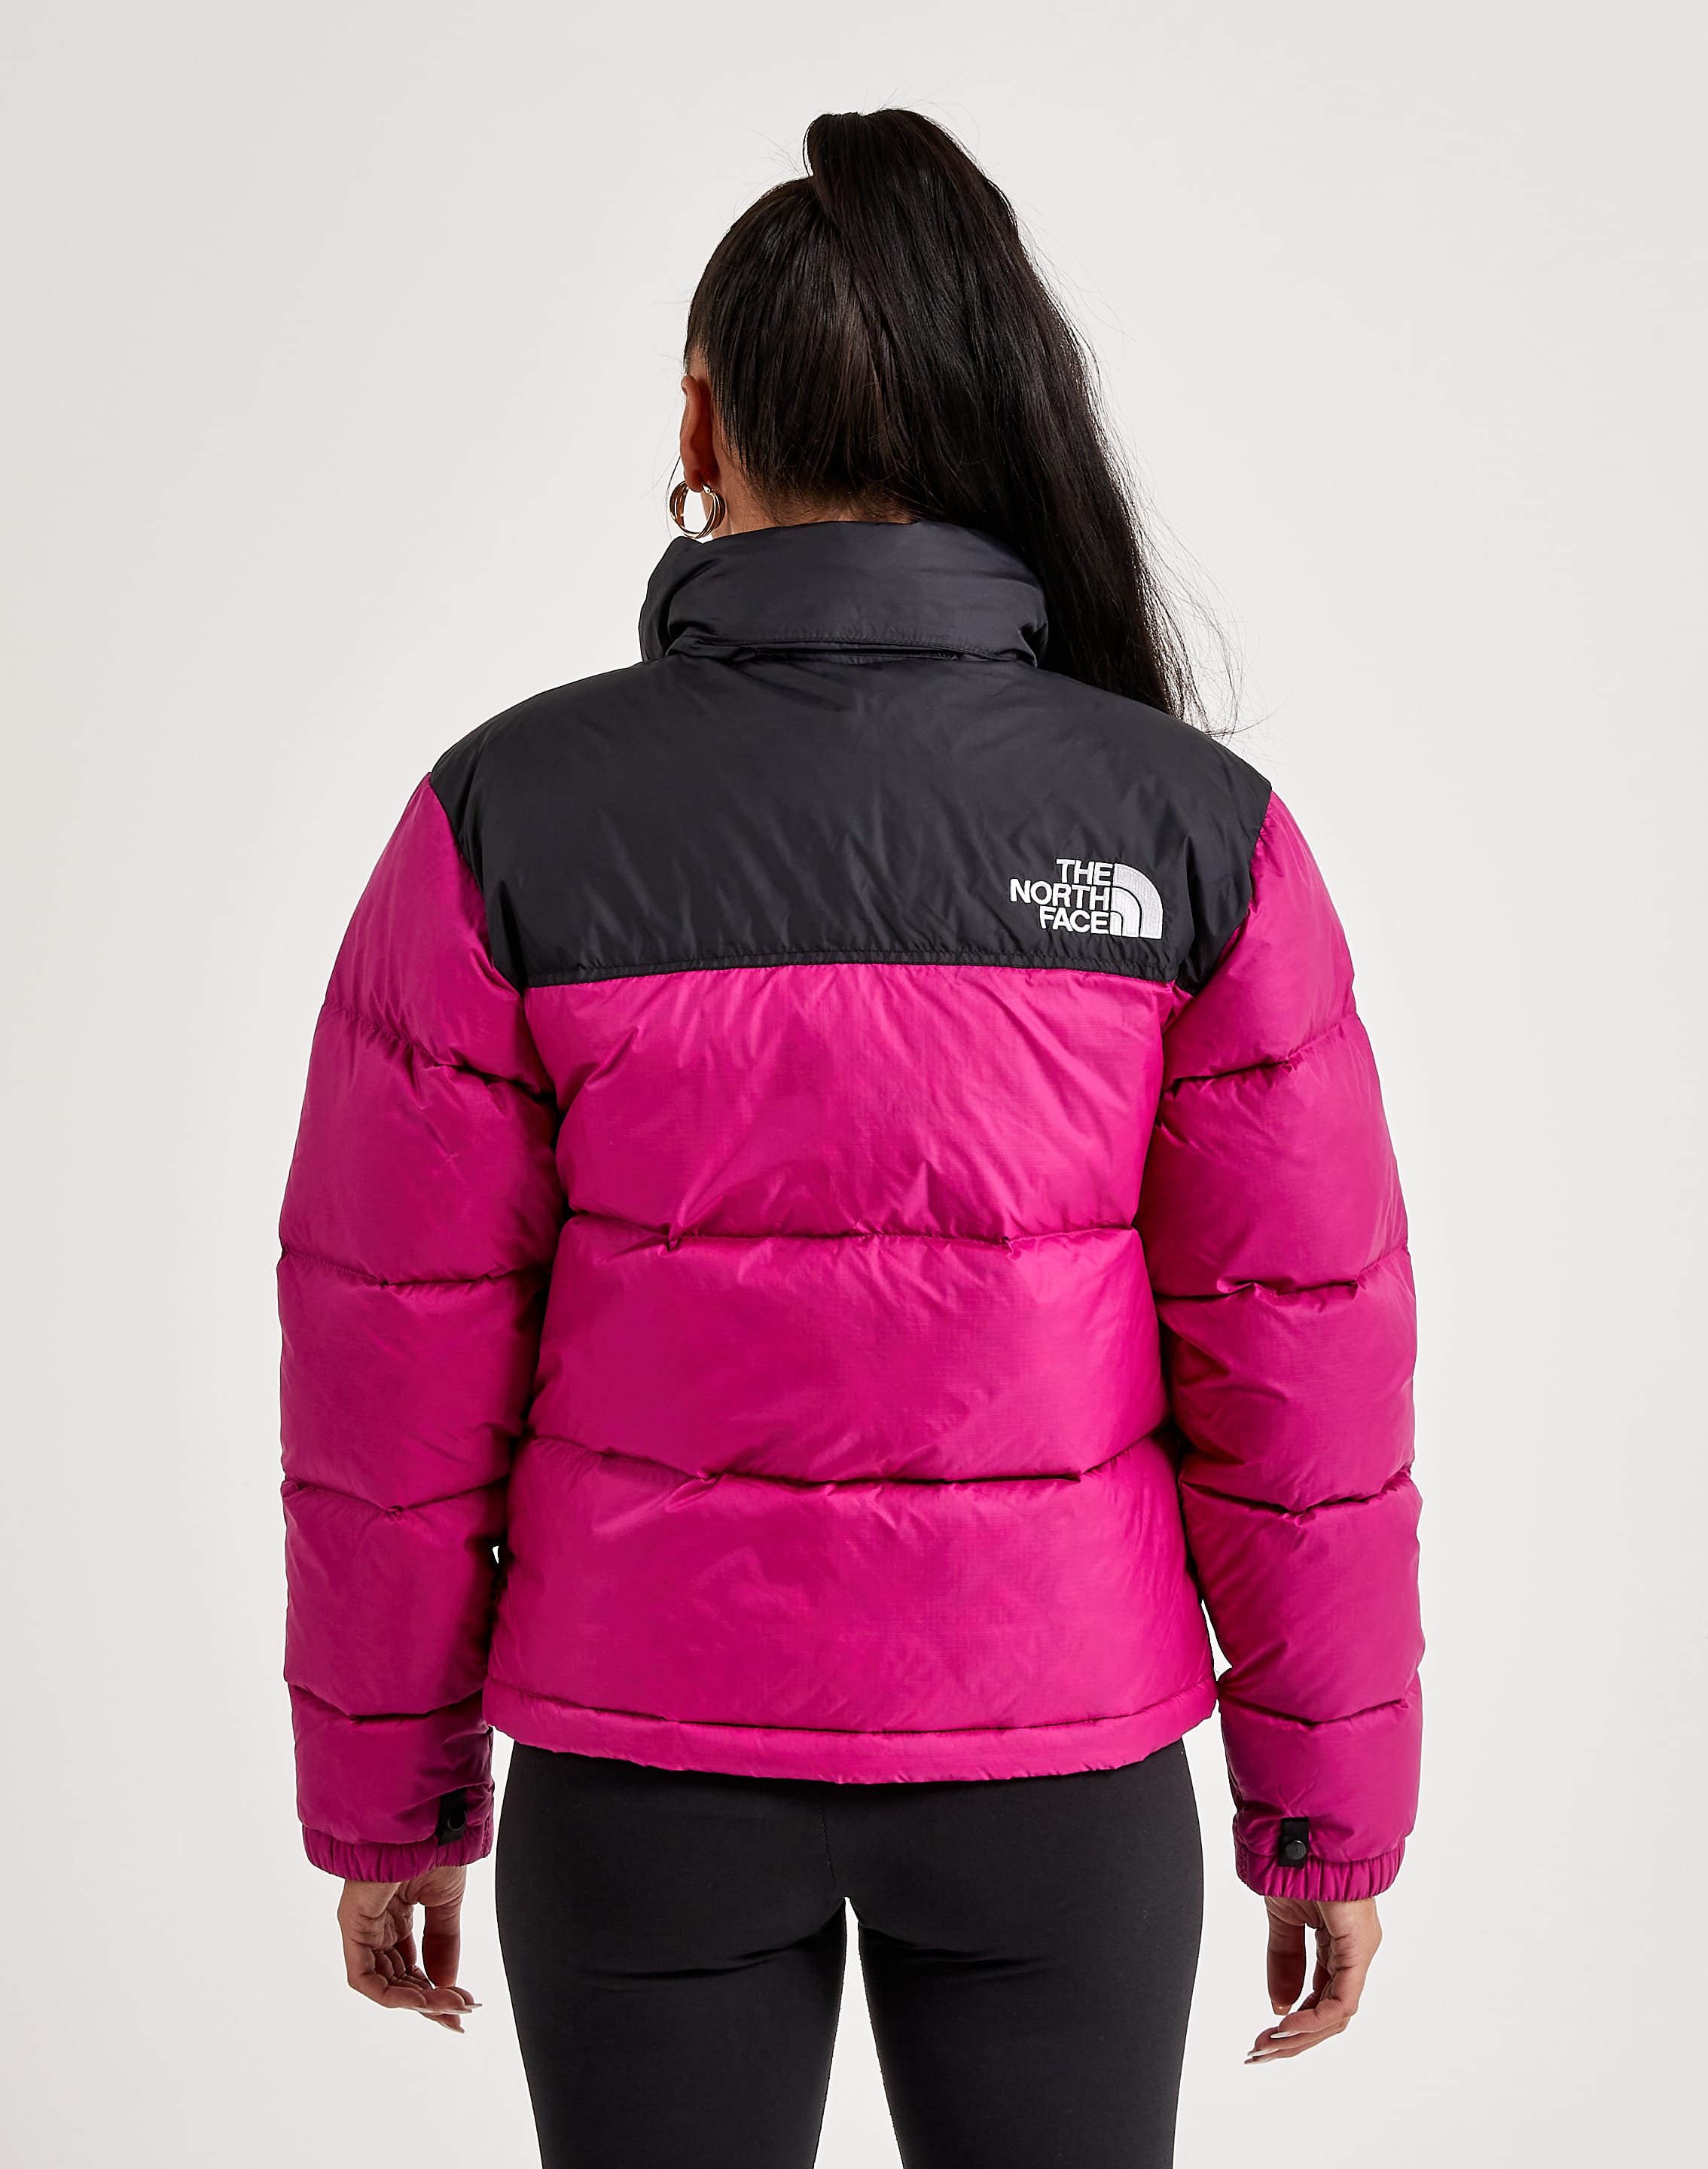 The North Face 1996 Nuptse – DTLR